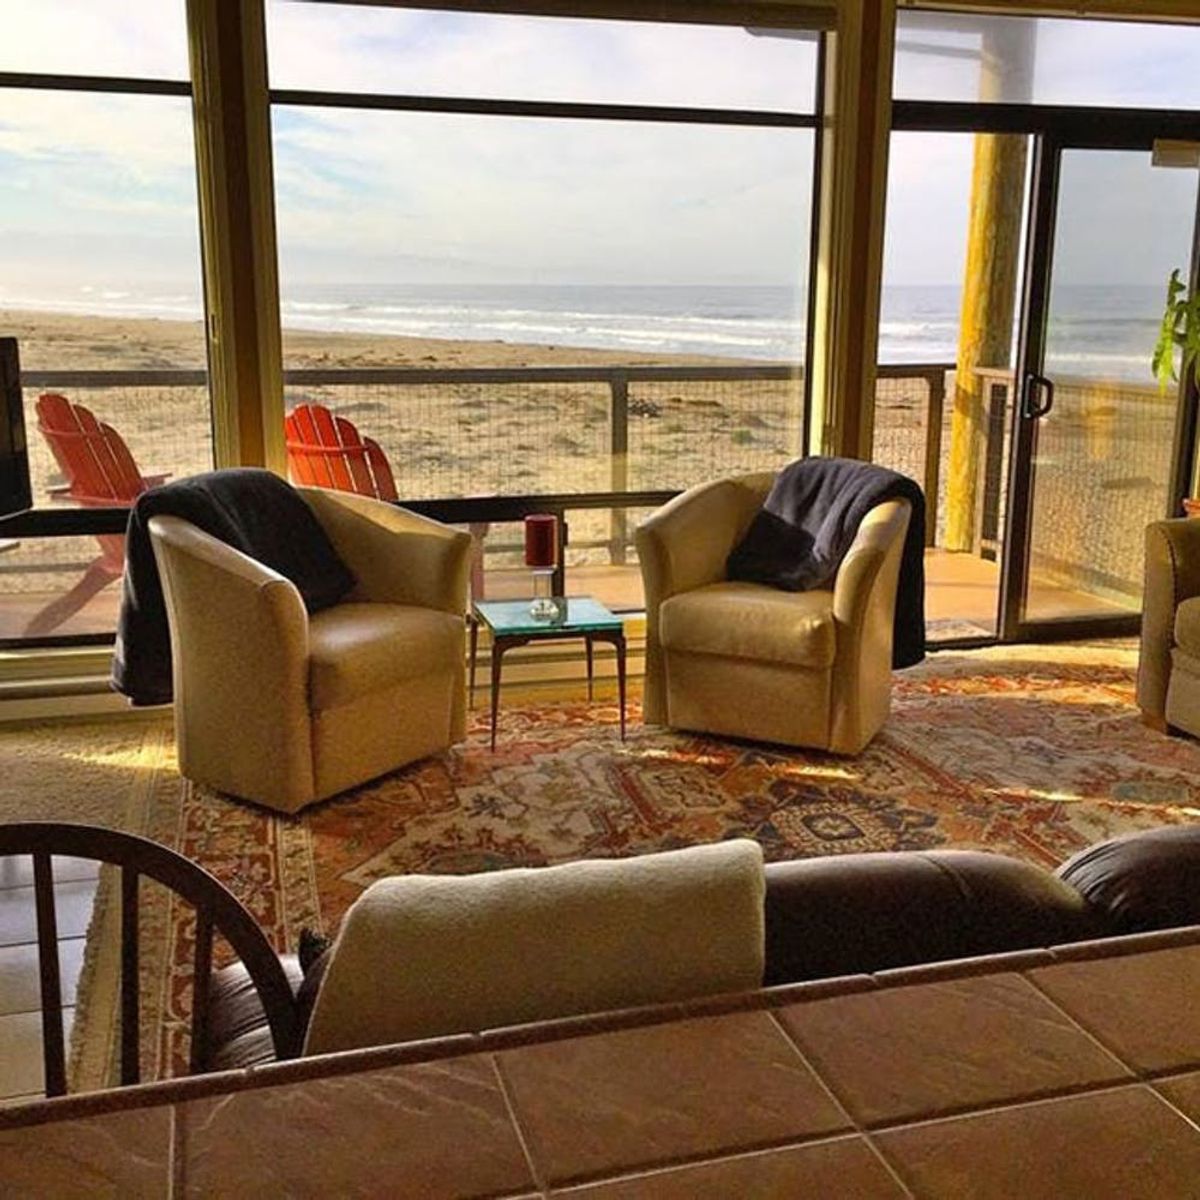 8 Beachfront Airbnbs for Your Next Relaxing Summer Vacation